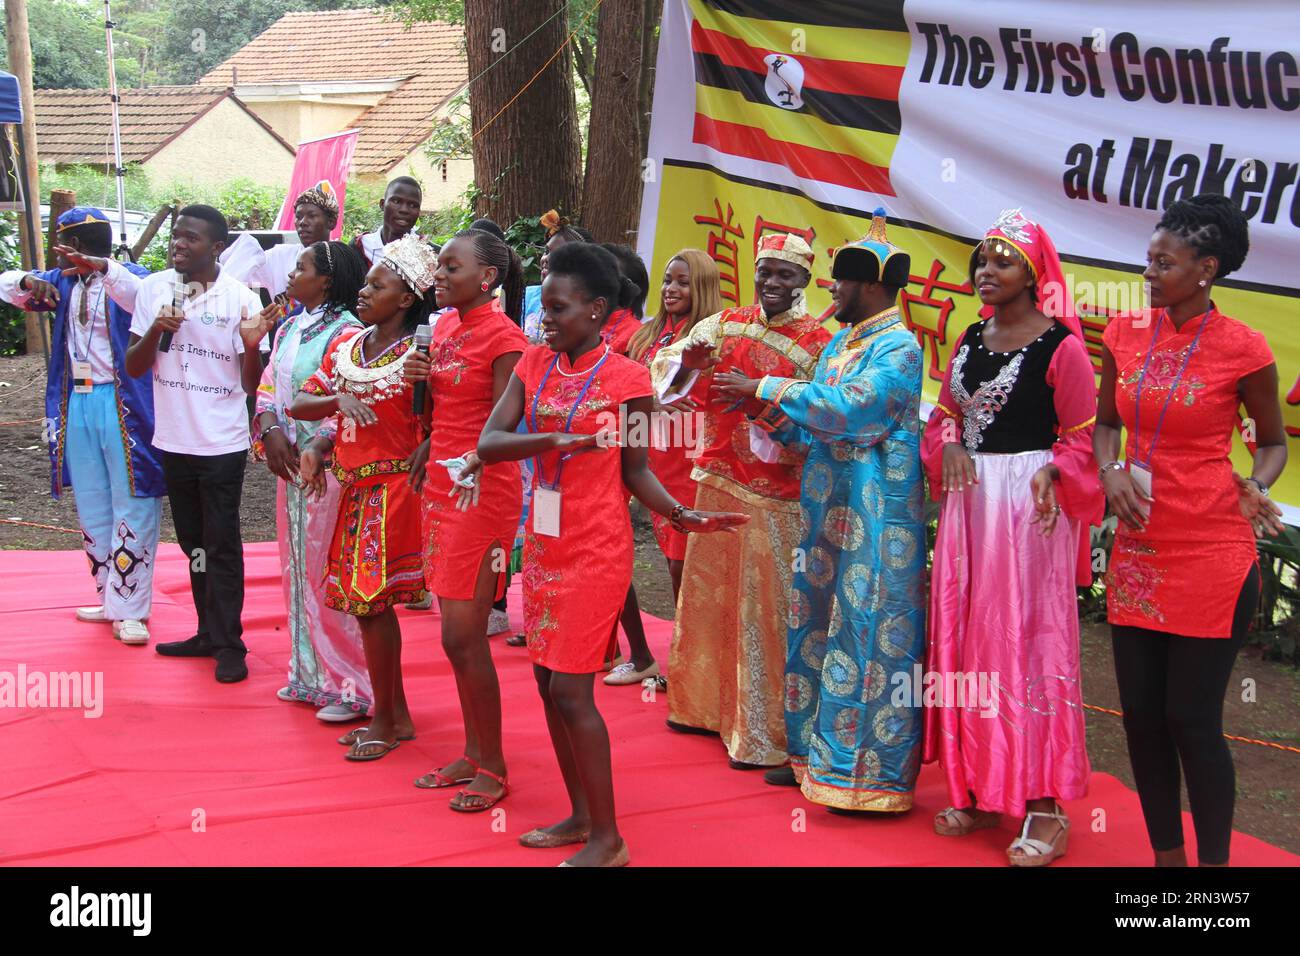 Local students sing Chinese songs during the first Confucius Institute Open Day at Makerere University in Kampala, Uganda, April 25, 2015. The first Confucius Institute Open Day at Makerere University was held on Saturday in Kampala. ) UGANDA-KAMPALA-MAKERERE UNIVERSITY-CONFUCIUS INSTITUTE-OPEN DAY YuanxQing PUBLICATIONxNOTxINxCHN   Local Students Sing Chinese Songs during The First Confucius Institute Open Day AT  University in Kampala Uganda April 25 2015 The First Confucius Institute Open Day AT  University what Hero ON Saturday in Kampala Uganda Kampala  University Confucius Institute Open Stock Photo